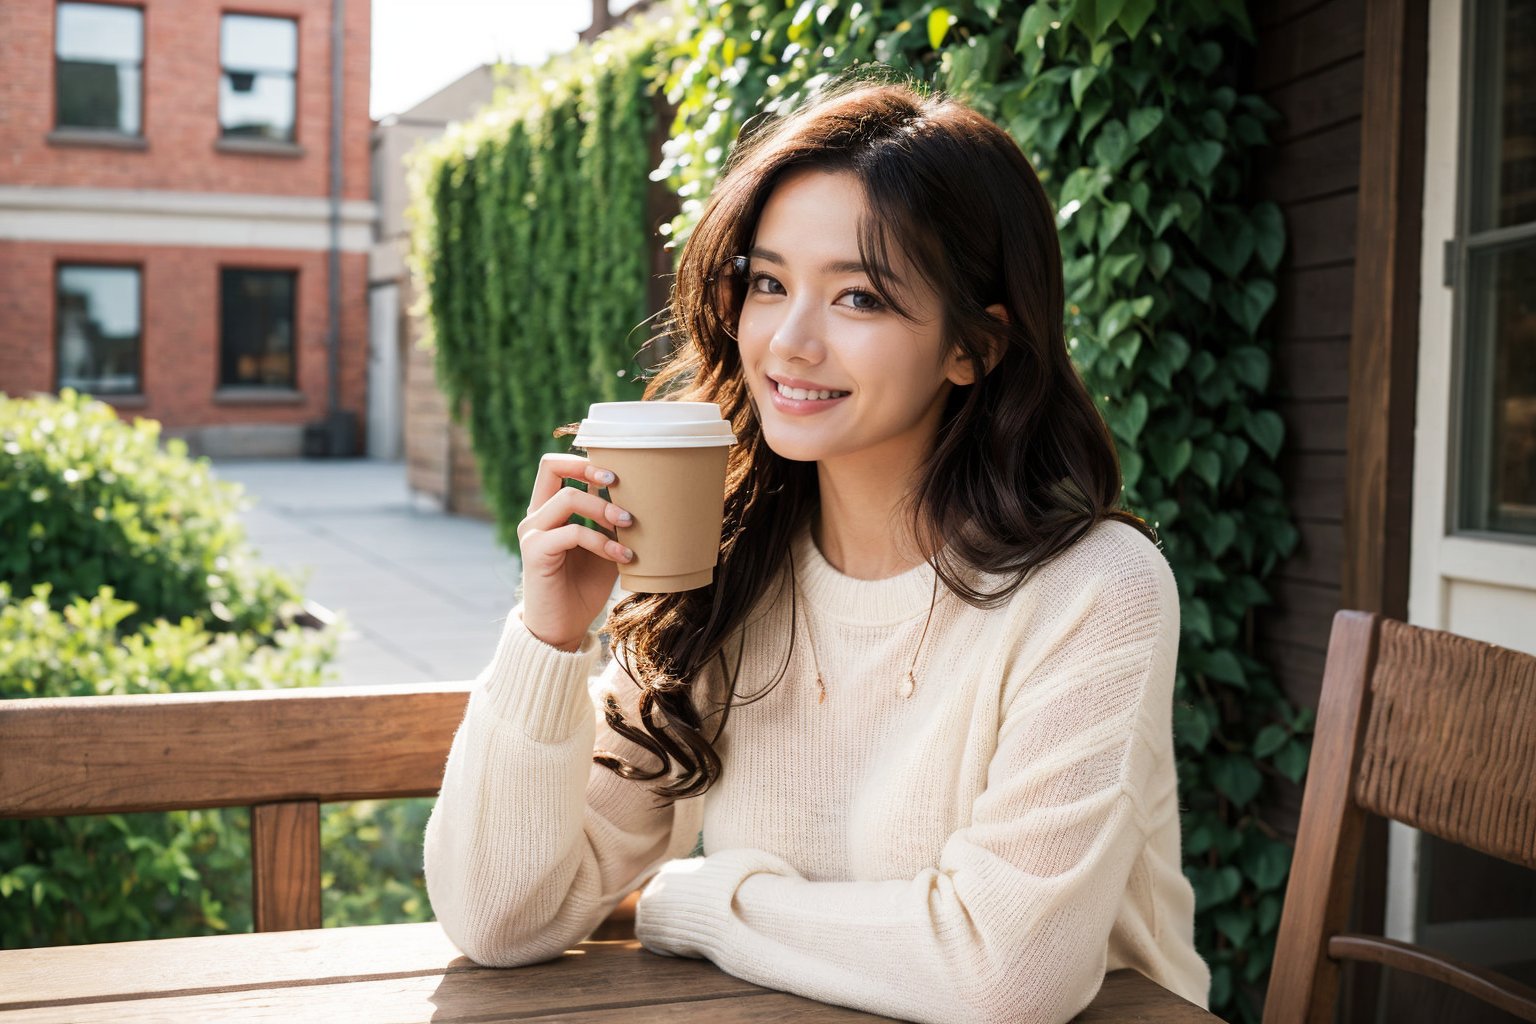 a woman ,with long wavy hair ,wearing sunglasses, wrapped in a cozy beige sweater, sitting near a large window. She holds a cup of coffee in her hand. A cat rests on a wooden table beside her. The background is a sunlit outdoor scene with buildings and greenery.